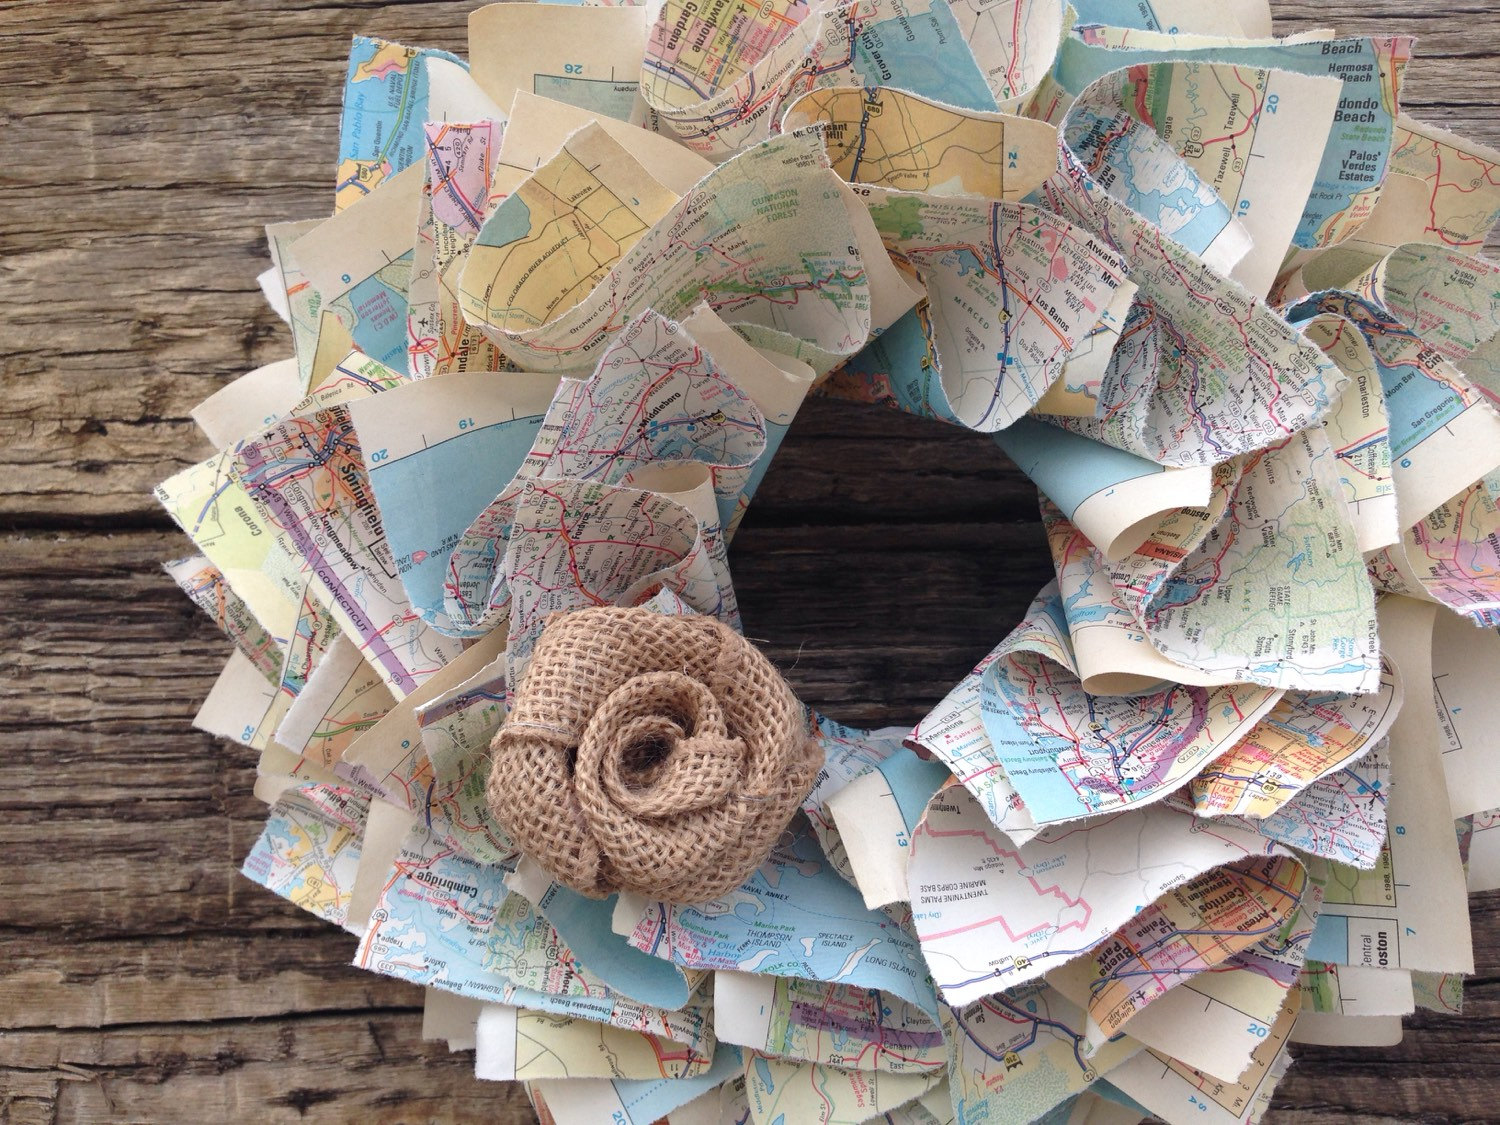 Map Wreath from The Ruffled Page on Etsy